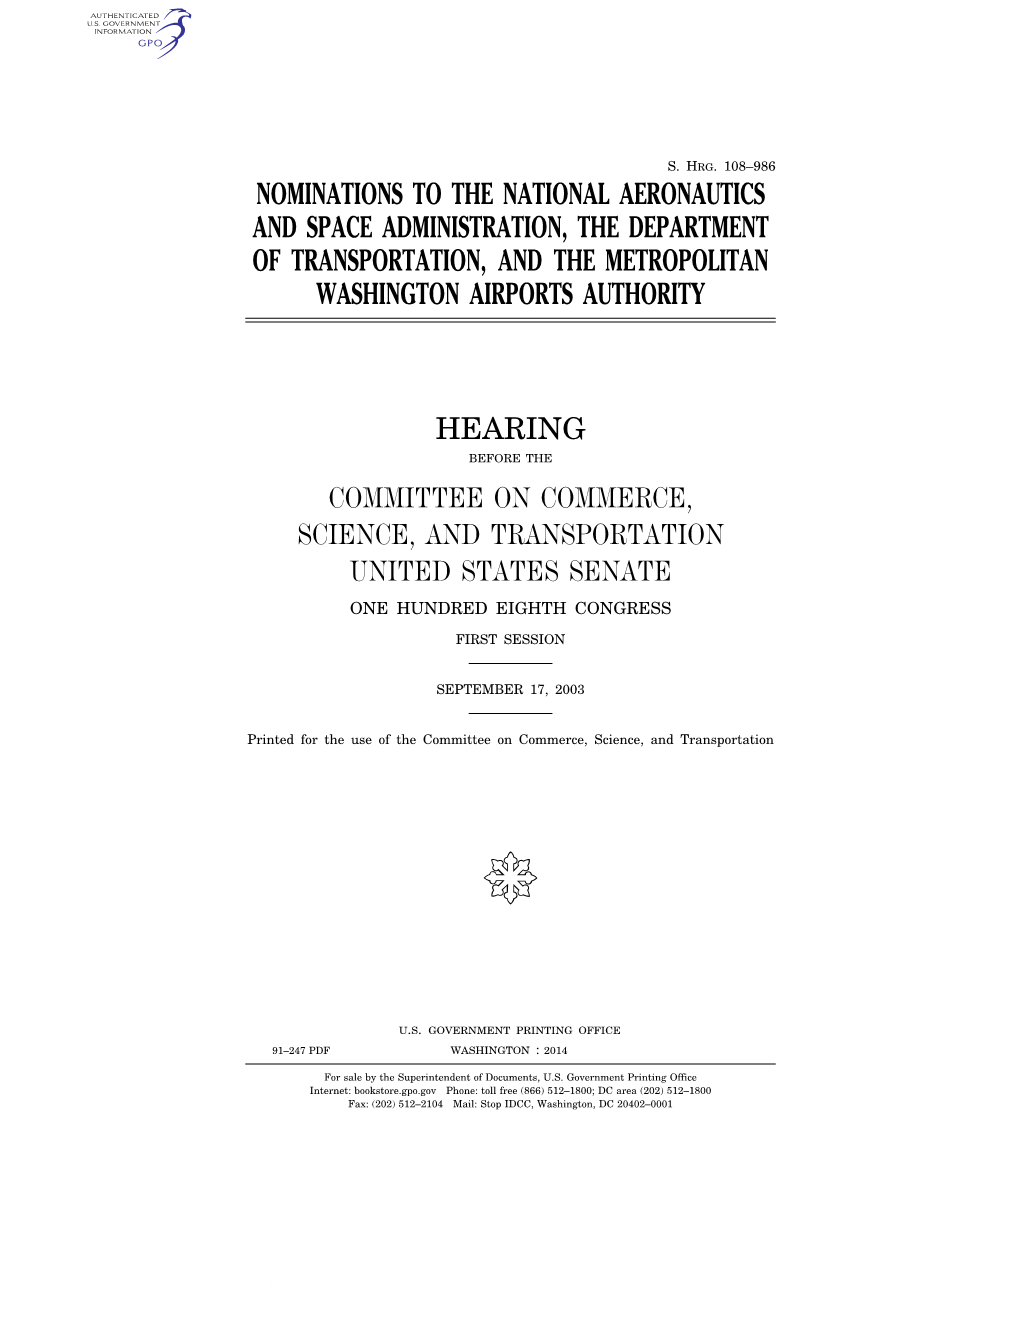 Nominations to the National Aeronautics and Space Administration, the Department of Transportation, and the Metropolitan Washington Airports Authority